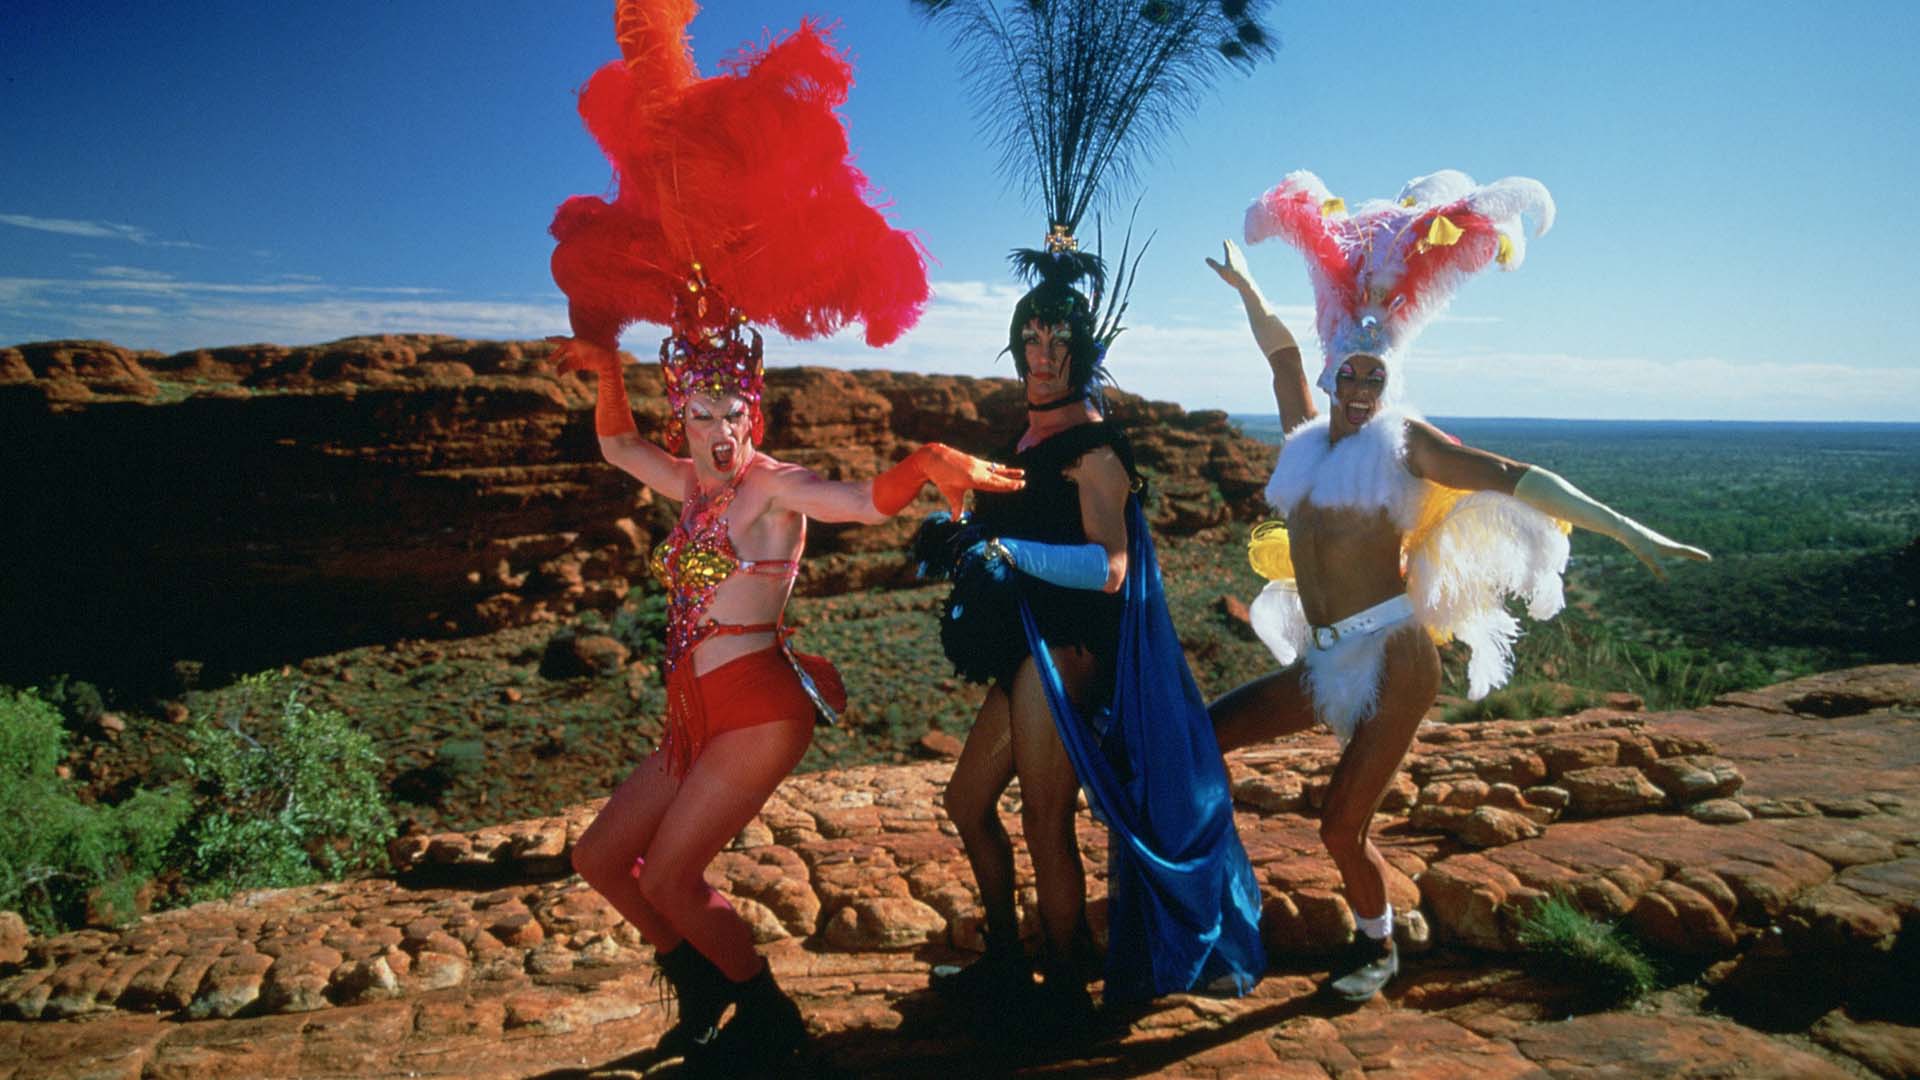 'The Adventures of Priscilla, Queen of the Desert' Is Getting a Three-Decades-Later Sequel Starring the Original Cast